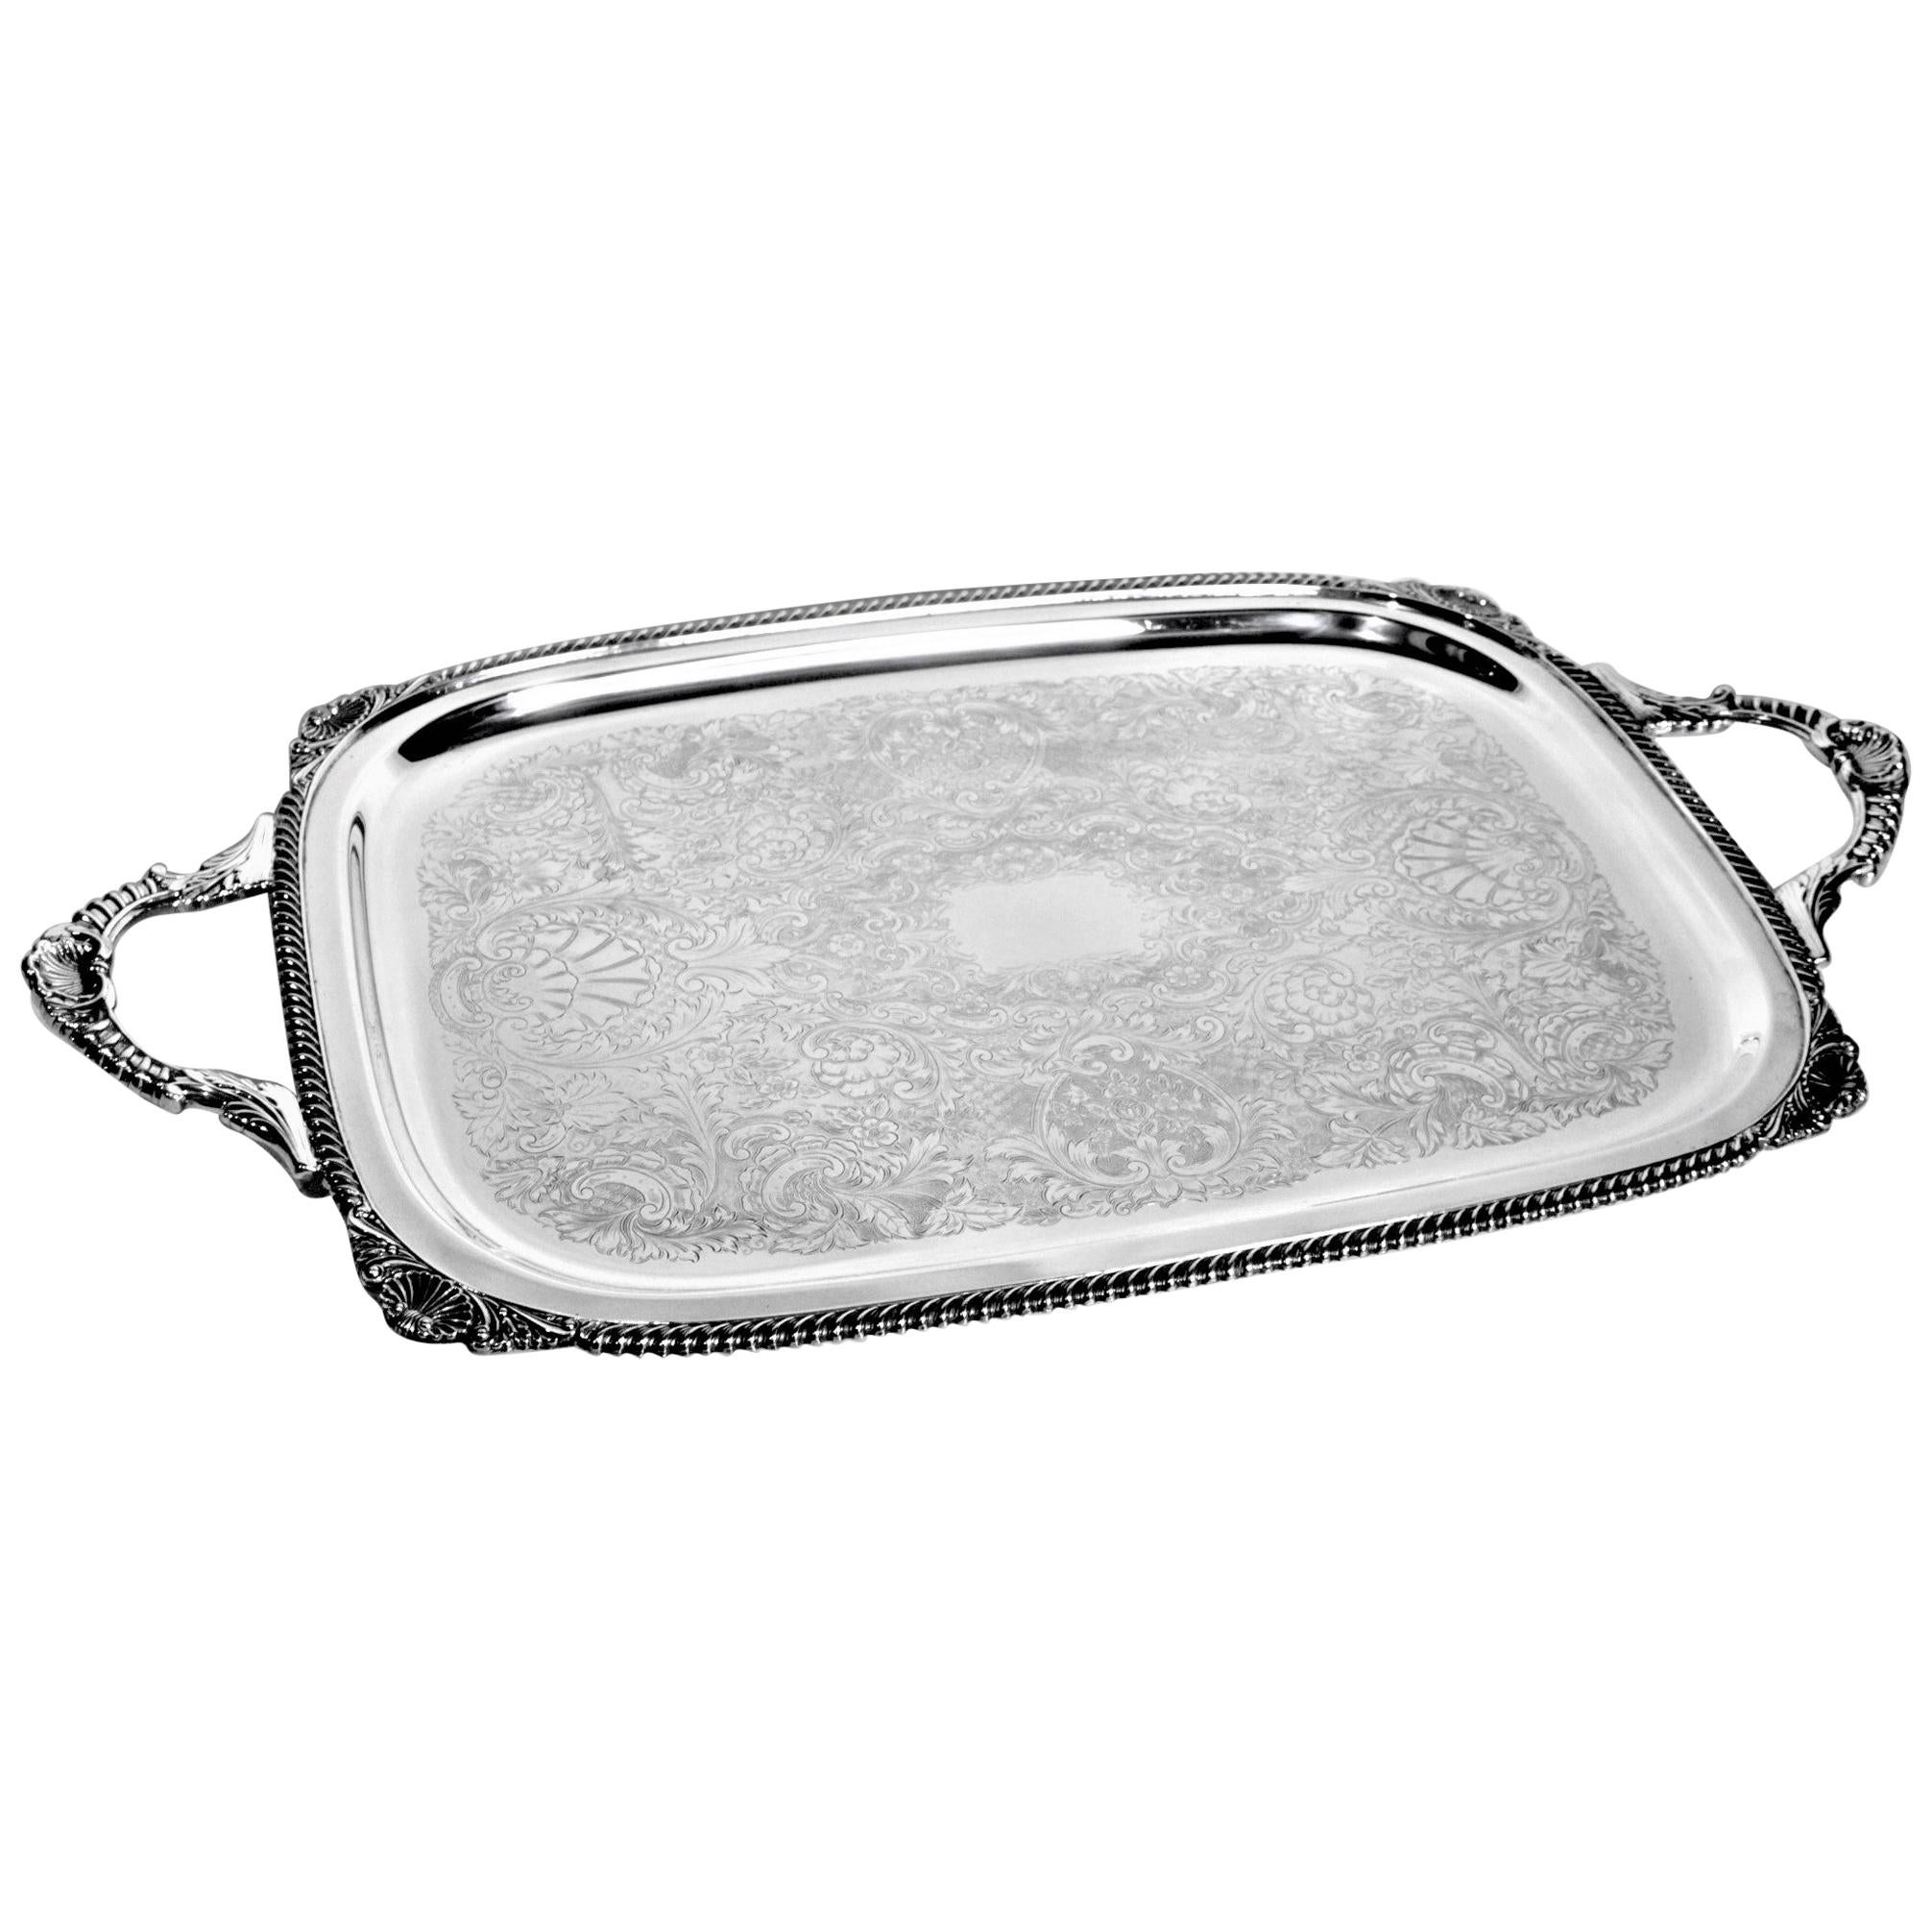 Birks Regency Silver Plated Serving Tray with Ornate Handles & Engraving